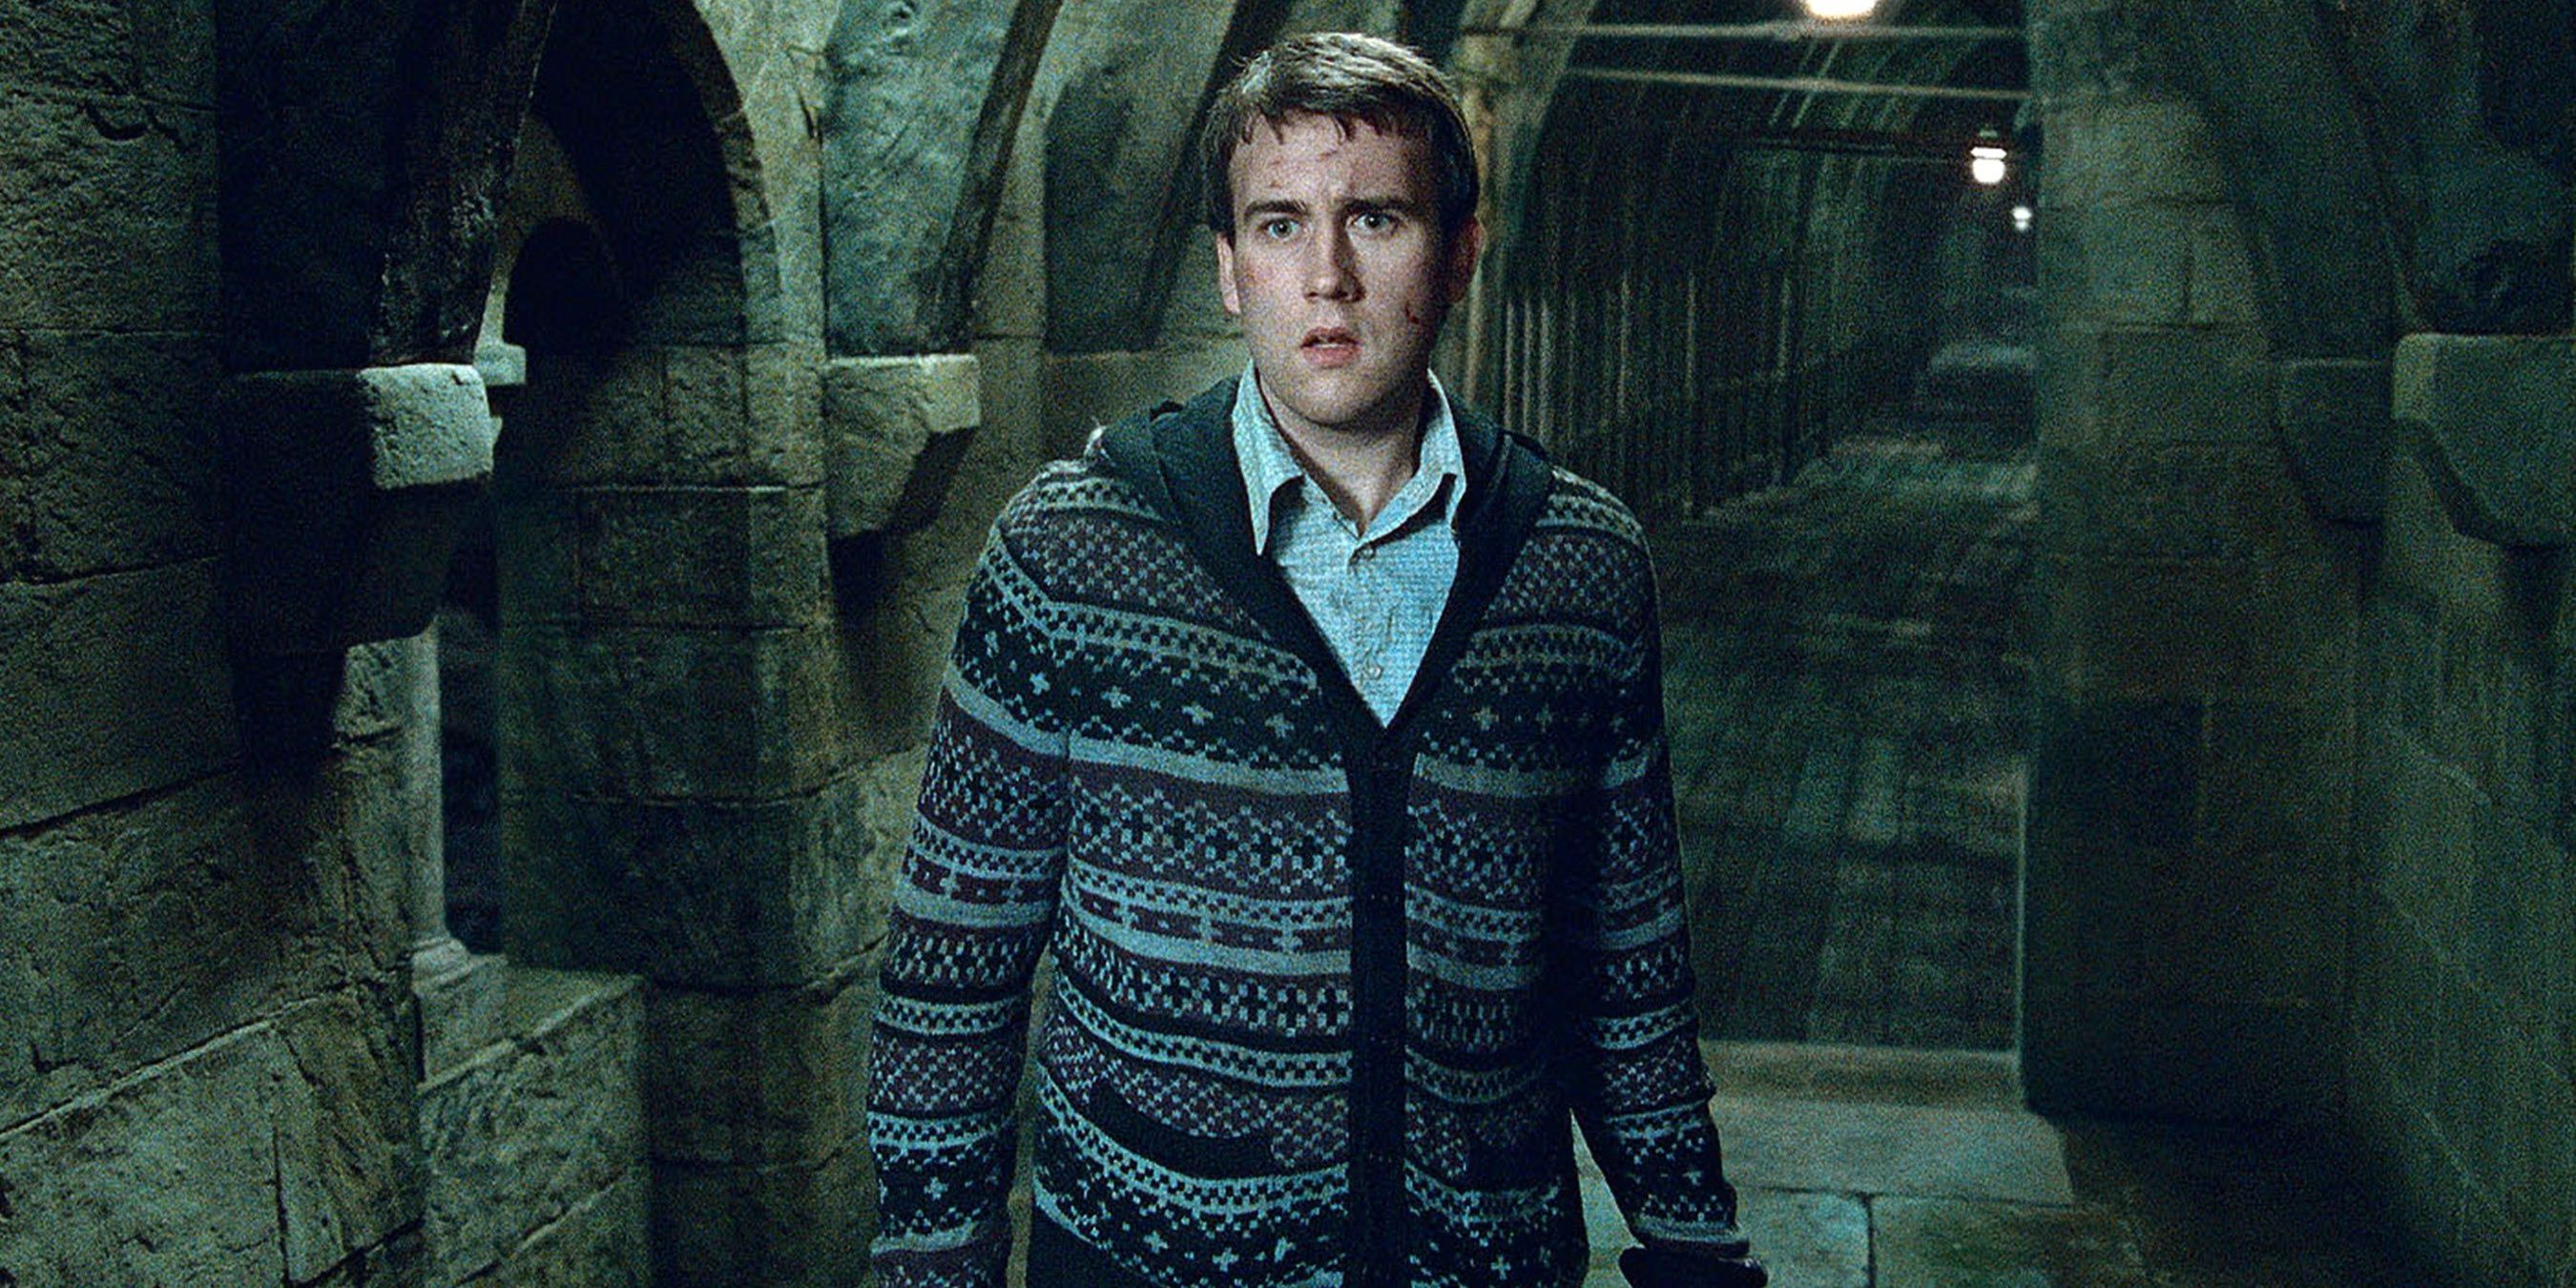 Neville standing on the bridge in Harry Potter and the Deathly Hallows